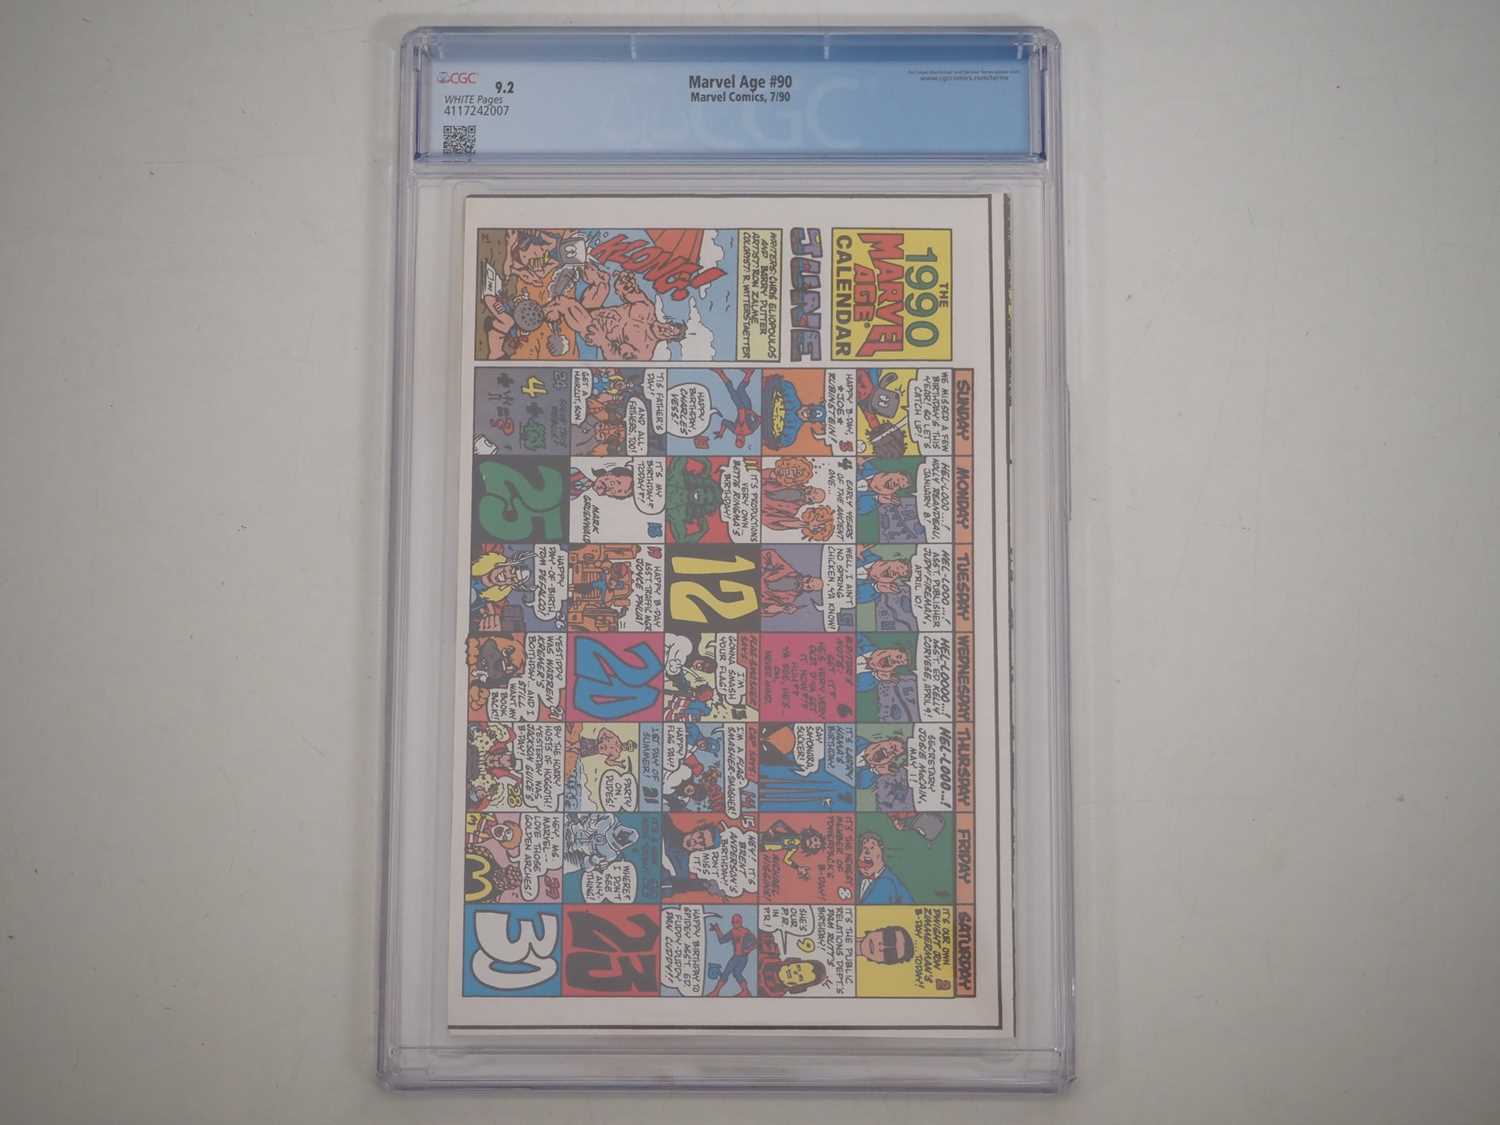 MARVEL AGE #90 (1990 - MARVEL) - GRADED 9.2 (NM-) by CGC - Spider-Man #1 preview with cover art by - Image 2 of 4